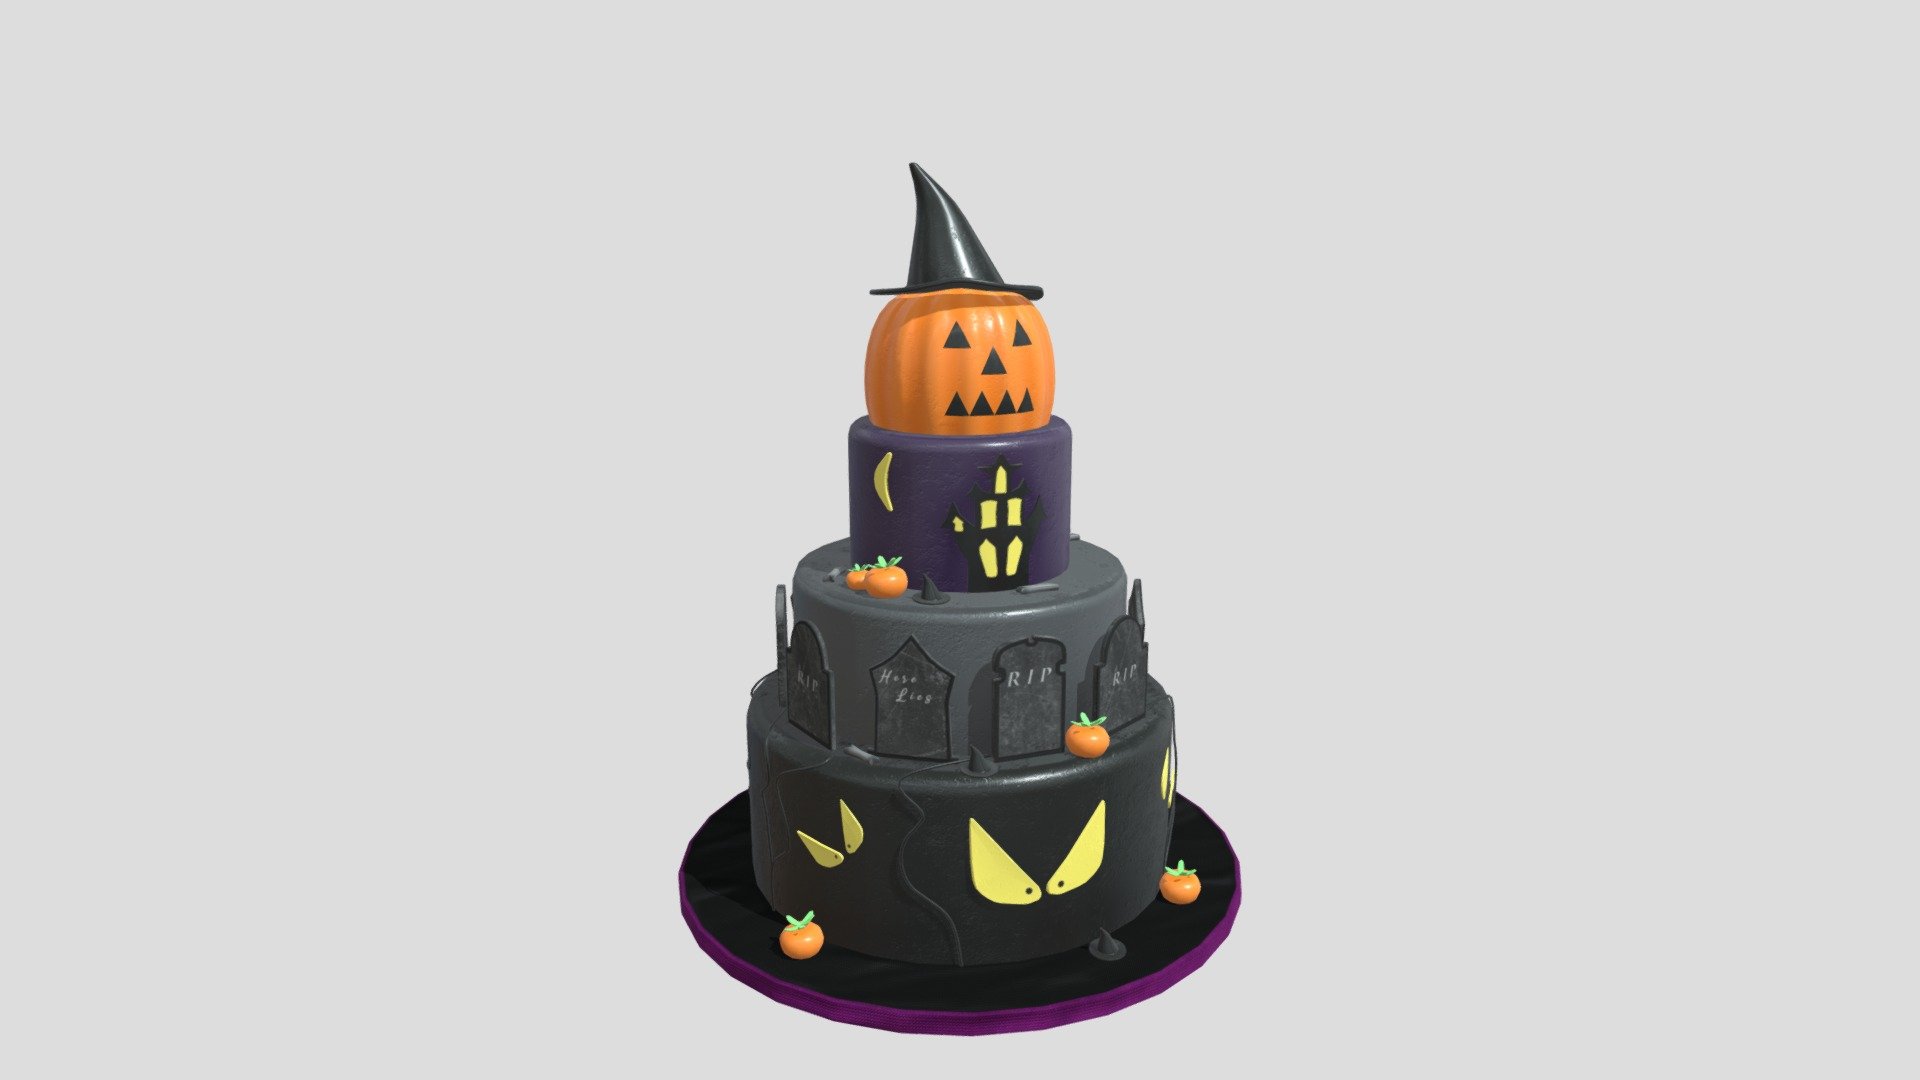 Three Level Halloween Cake 3D Model. This model contains the Three Level Halloween Cake itself

All modeled in Maya, textured with Substance Painter.

The model was built to scale and is UV unwrapped properly. Contains only one 4K texture set.

⦁ 16828 tris.

⦁ Contains: .FBX .OBJ and .DAE

⦁ Model has clean topology. No Ngons.

⦁ Built to scale

⦁ Unwrapped UV Map

⦁ 4K Texture set

⦁ High quality details

⦁ Based on real life references

⦁ Renders done in Marmoset Toolbag

Polycount:

verts 8933

edges 17738

faces 8911

tris 16828

If you have any questions please feel free to ask me 3d model